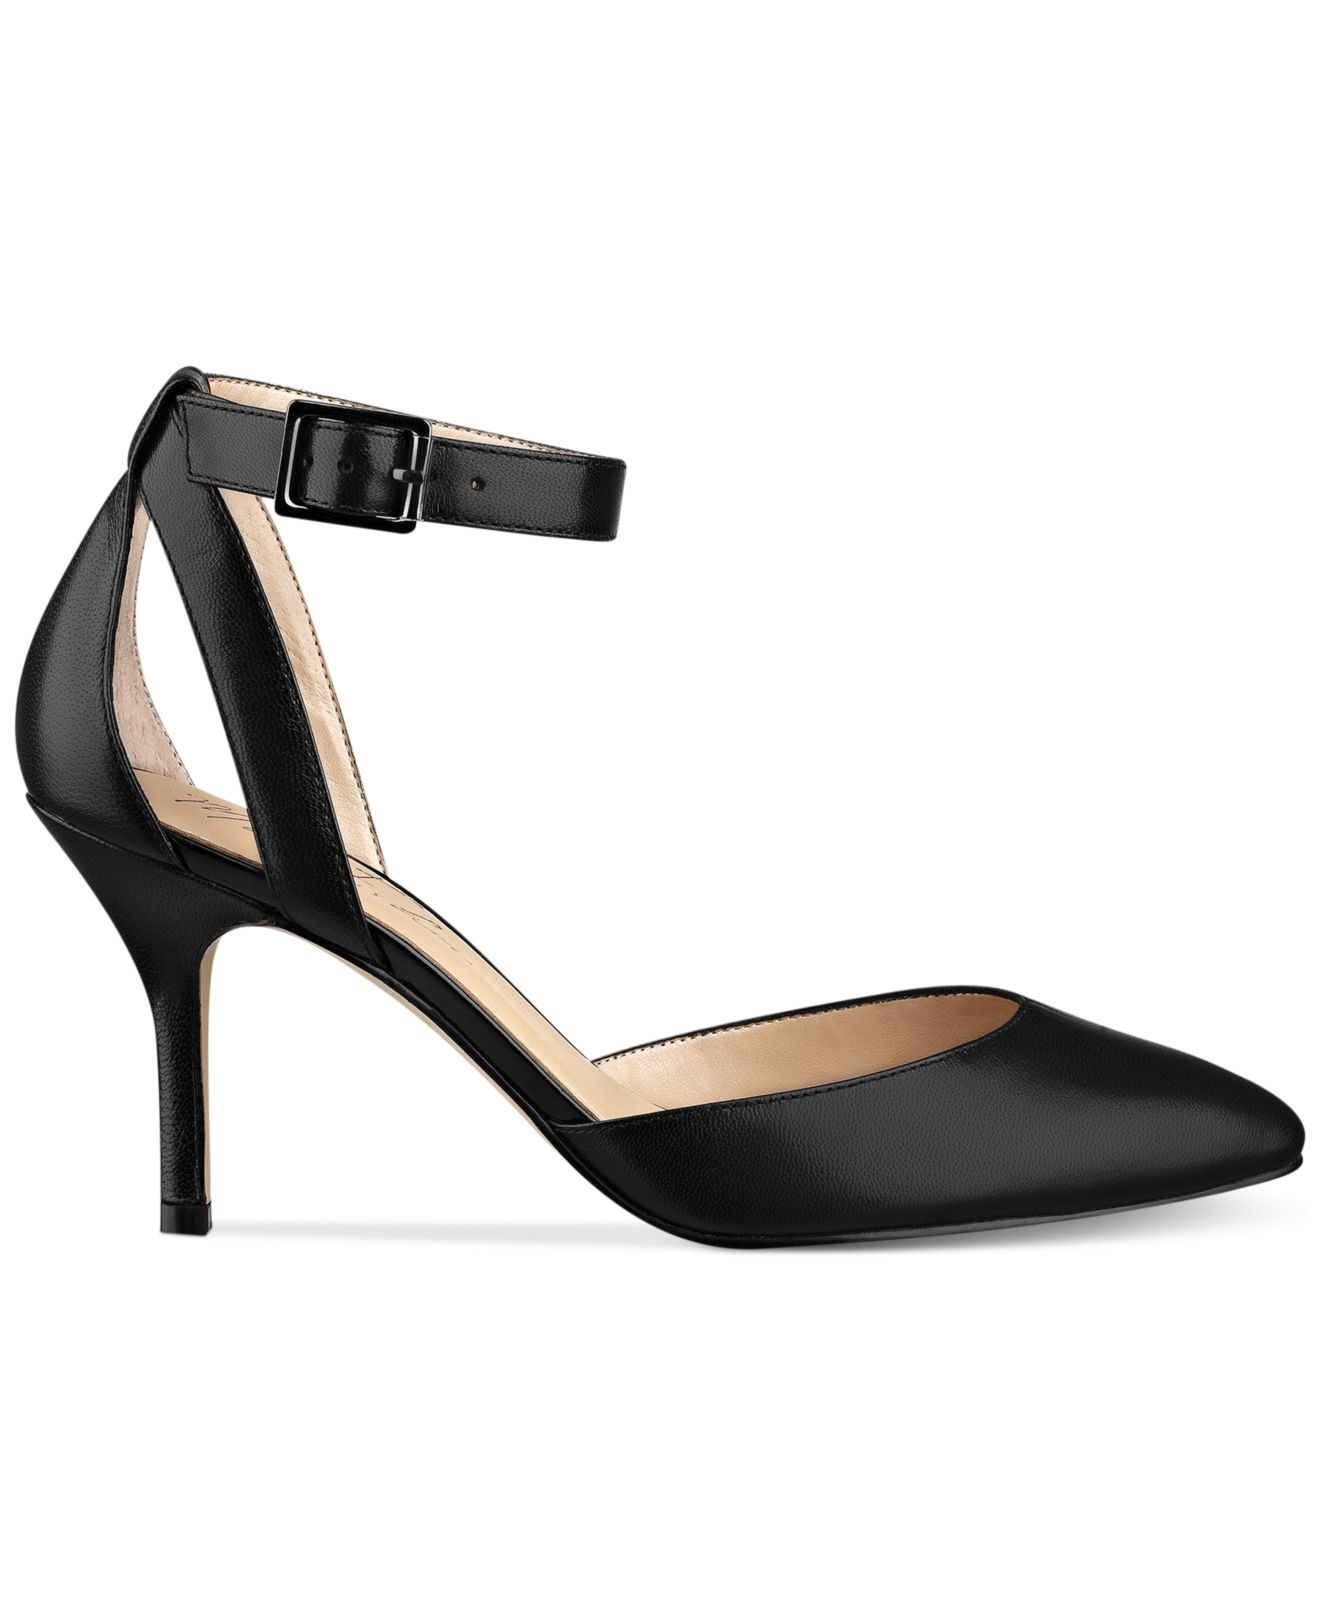 Lyst - Marc Fisher Hien Ankle Strap Pumps in Black